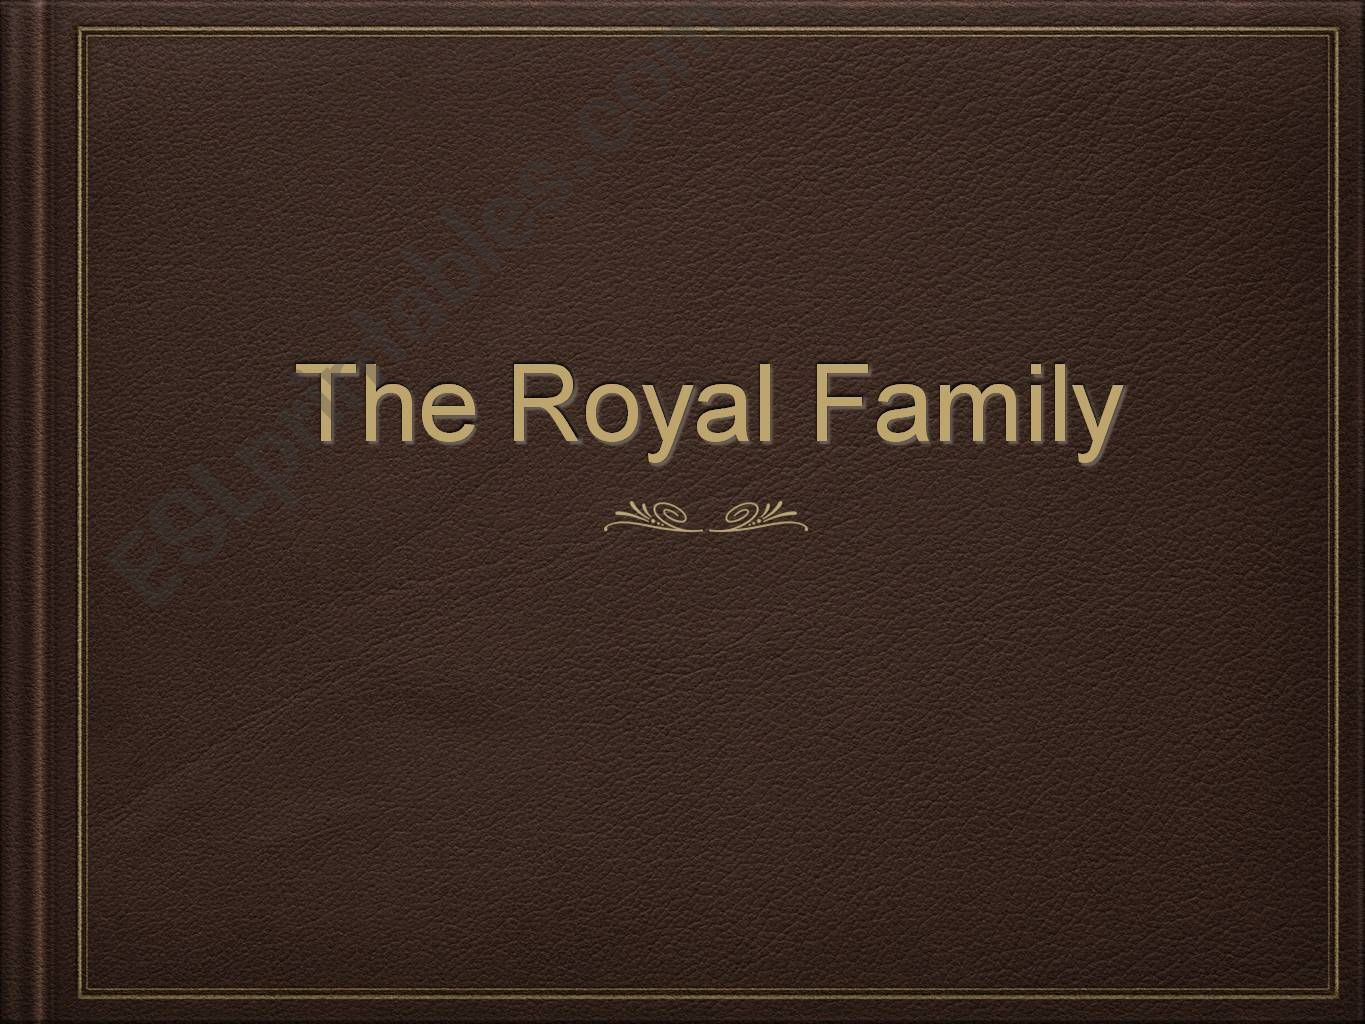 Learn family names with the Royal family